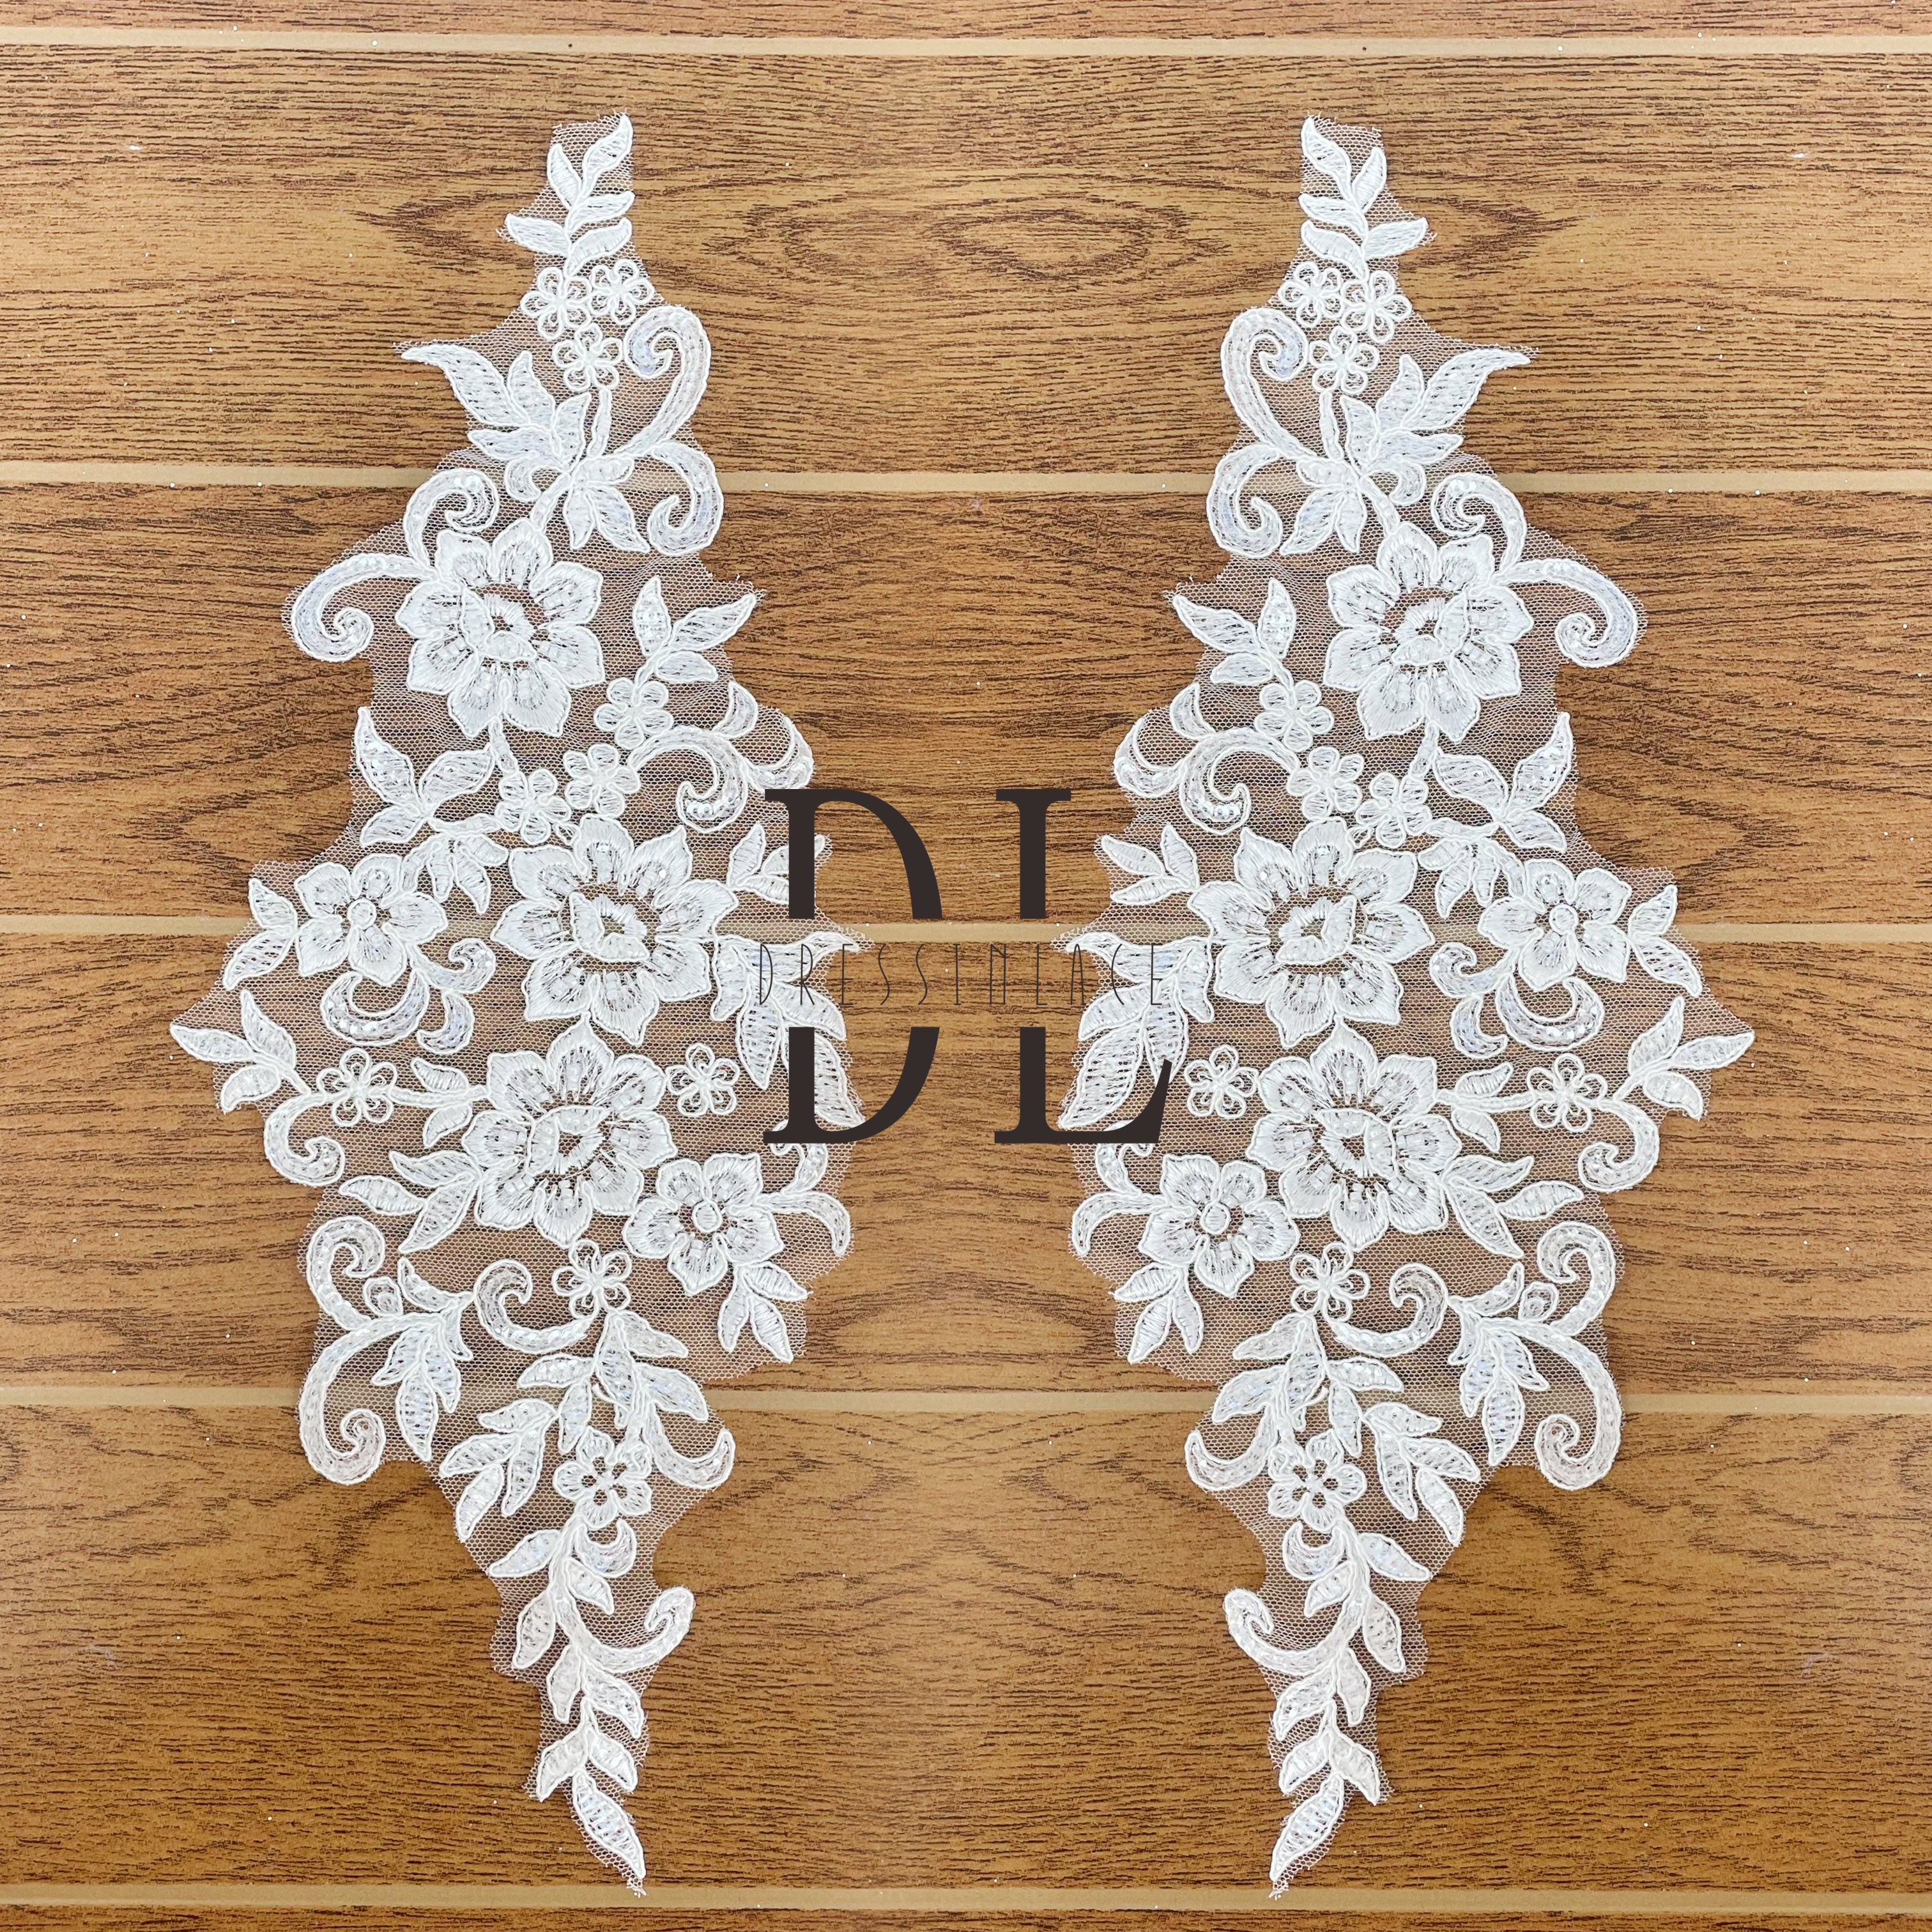 DLM2227 Exquisite Lace Applique with Beads and Shimmering Sequins - Perfect Bridal Accessory DLM2227